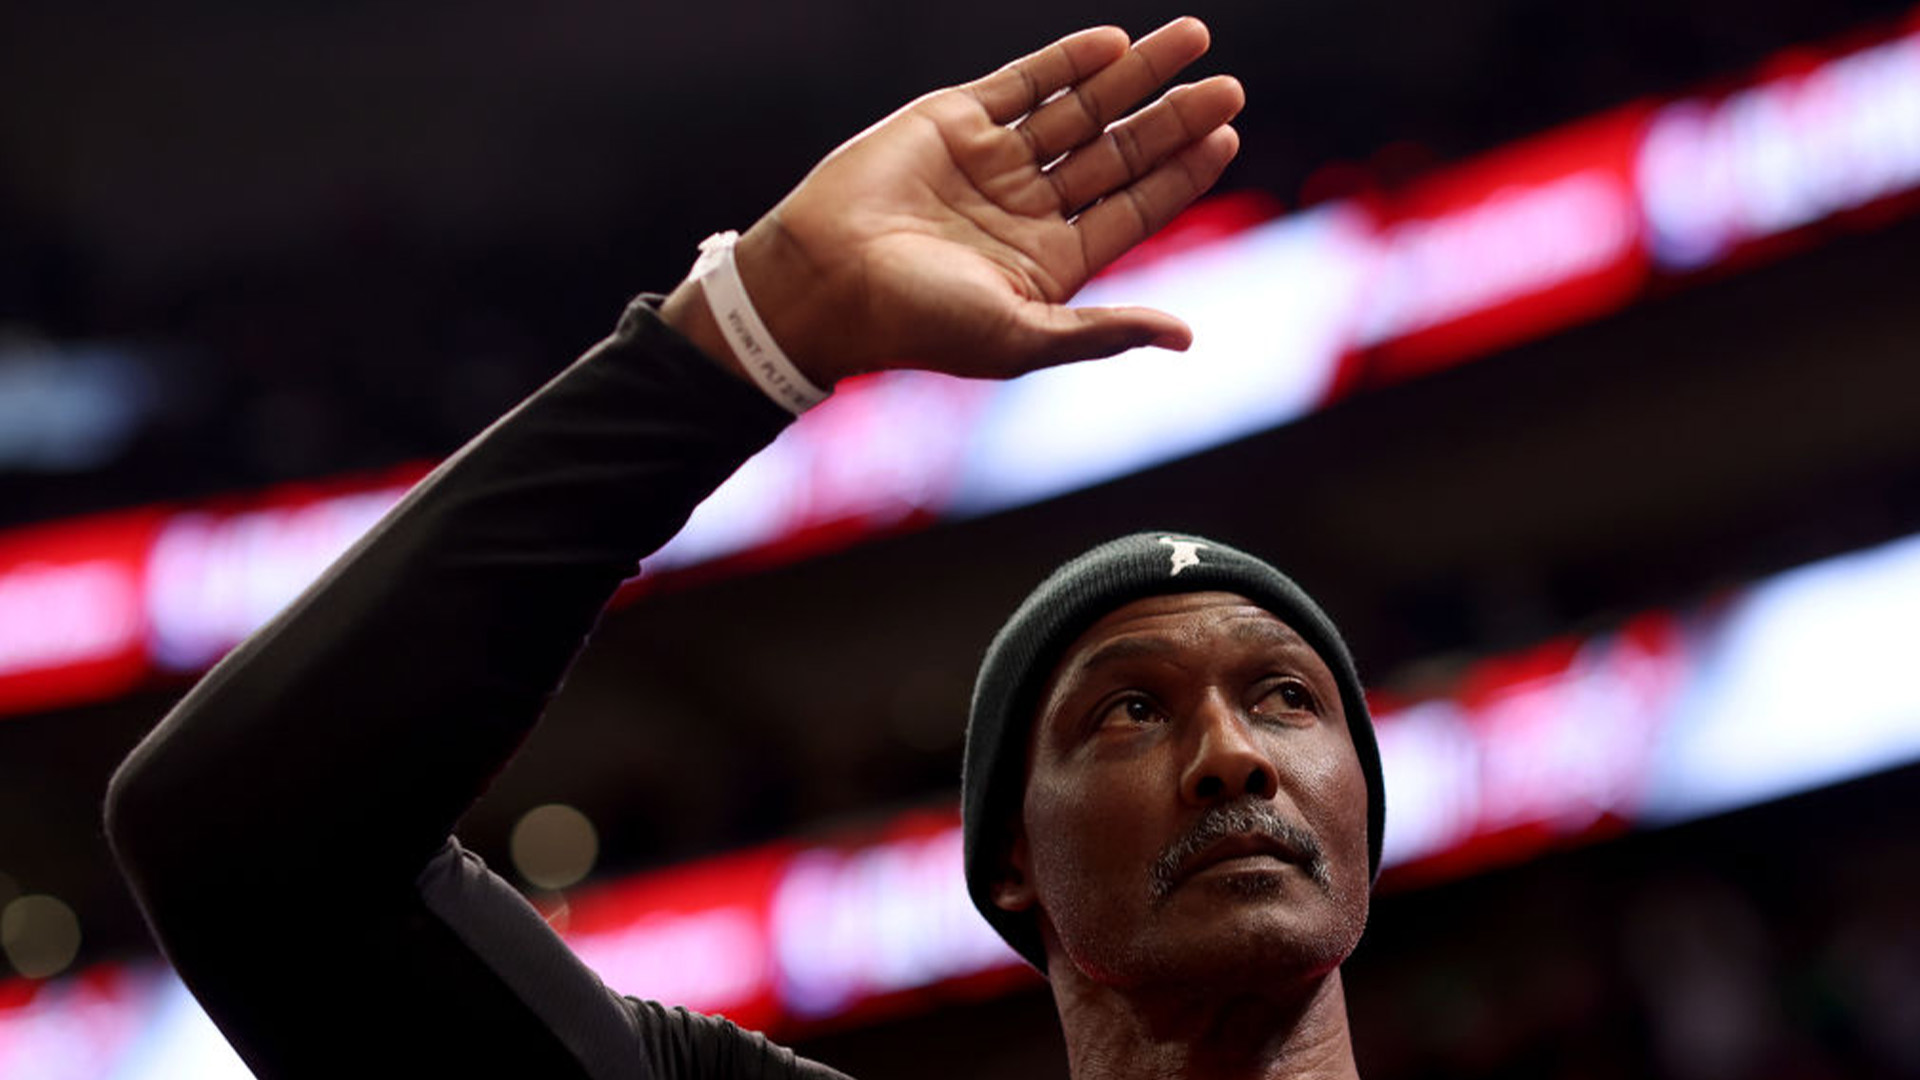 Karl Malone Rakes In $5M After Auctioning Memorabilia From The '92 Olympics 'Dream Team'